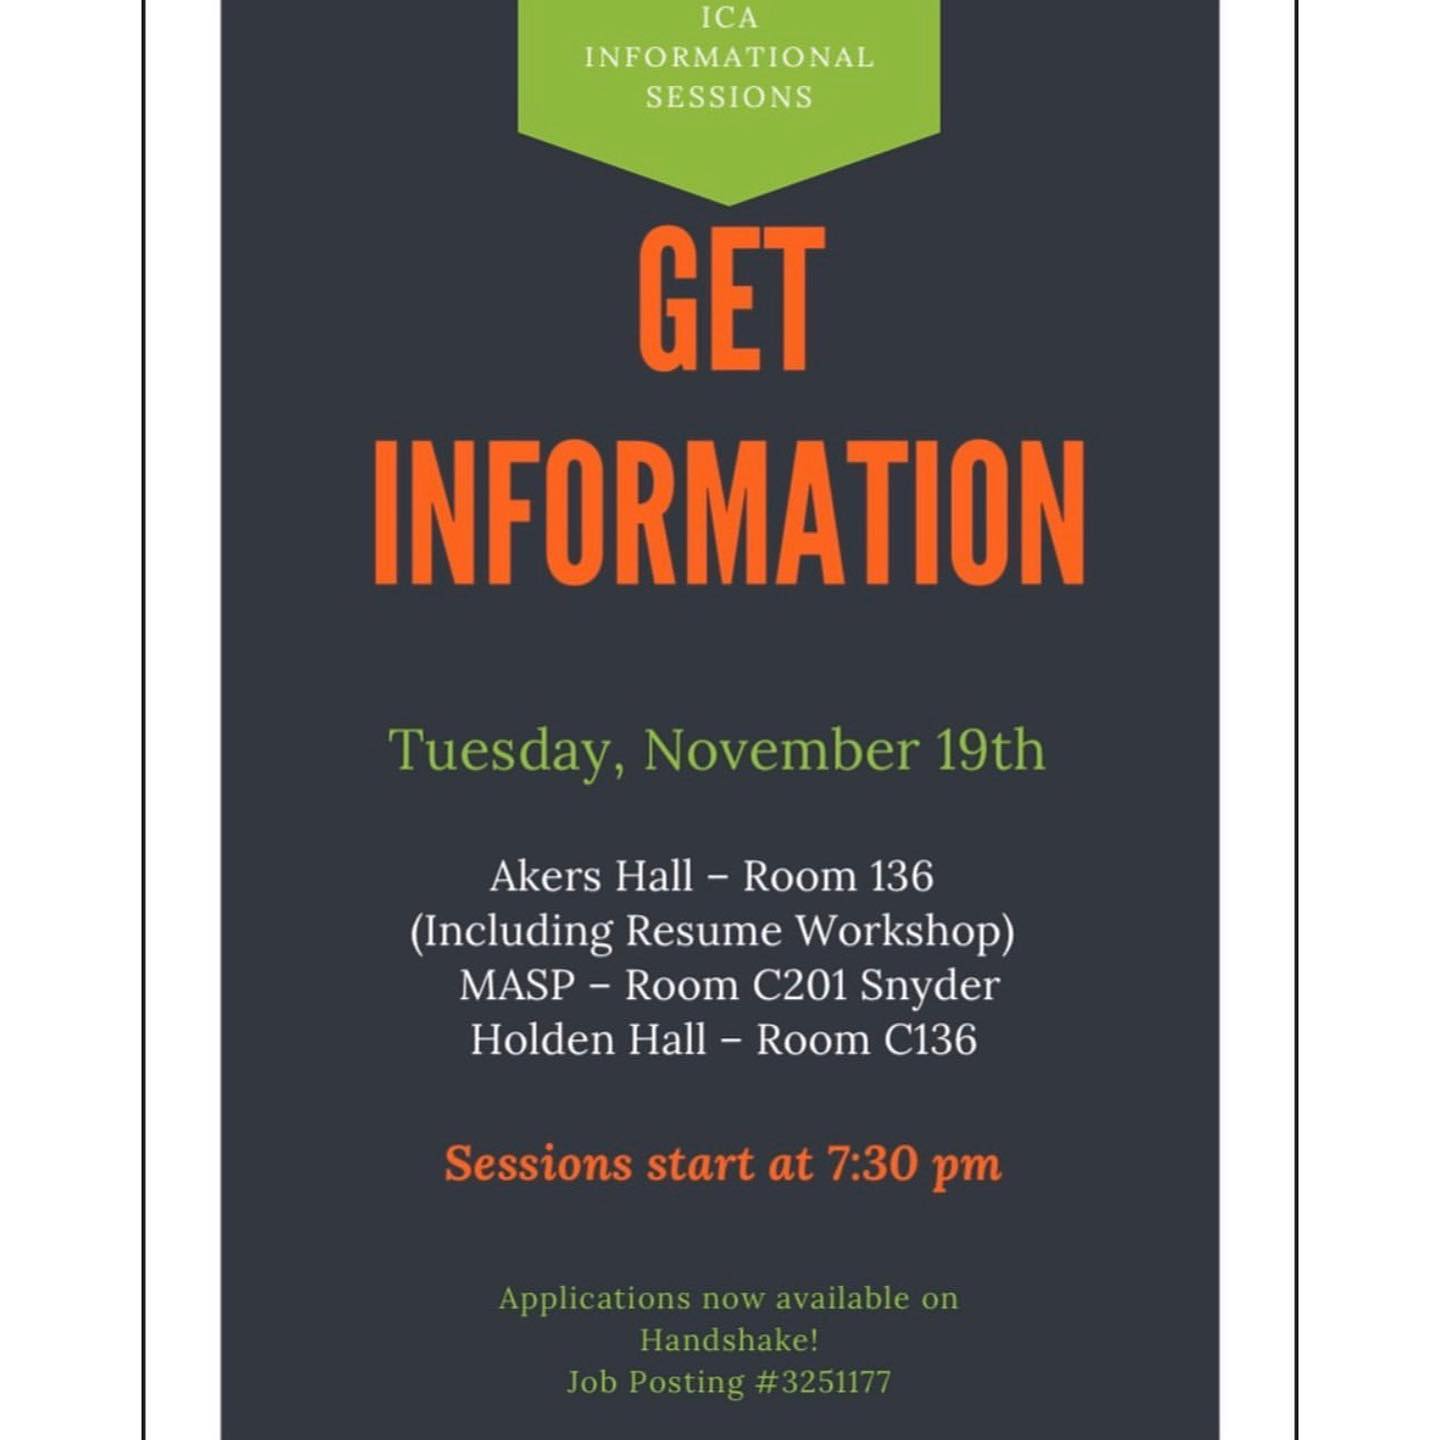 ICA Informational Sessions- Get Information